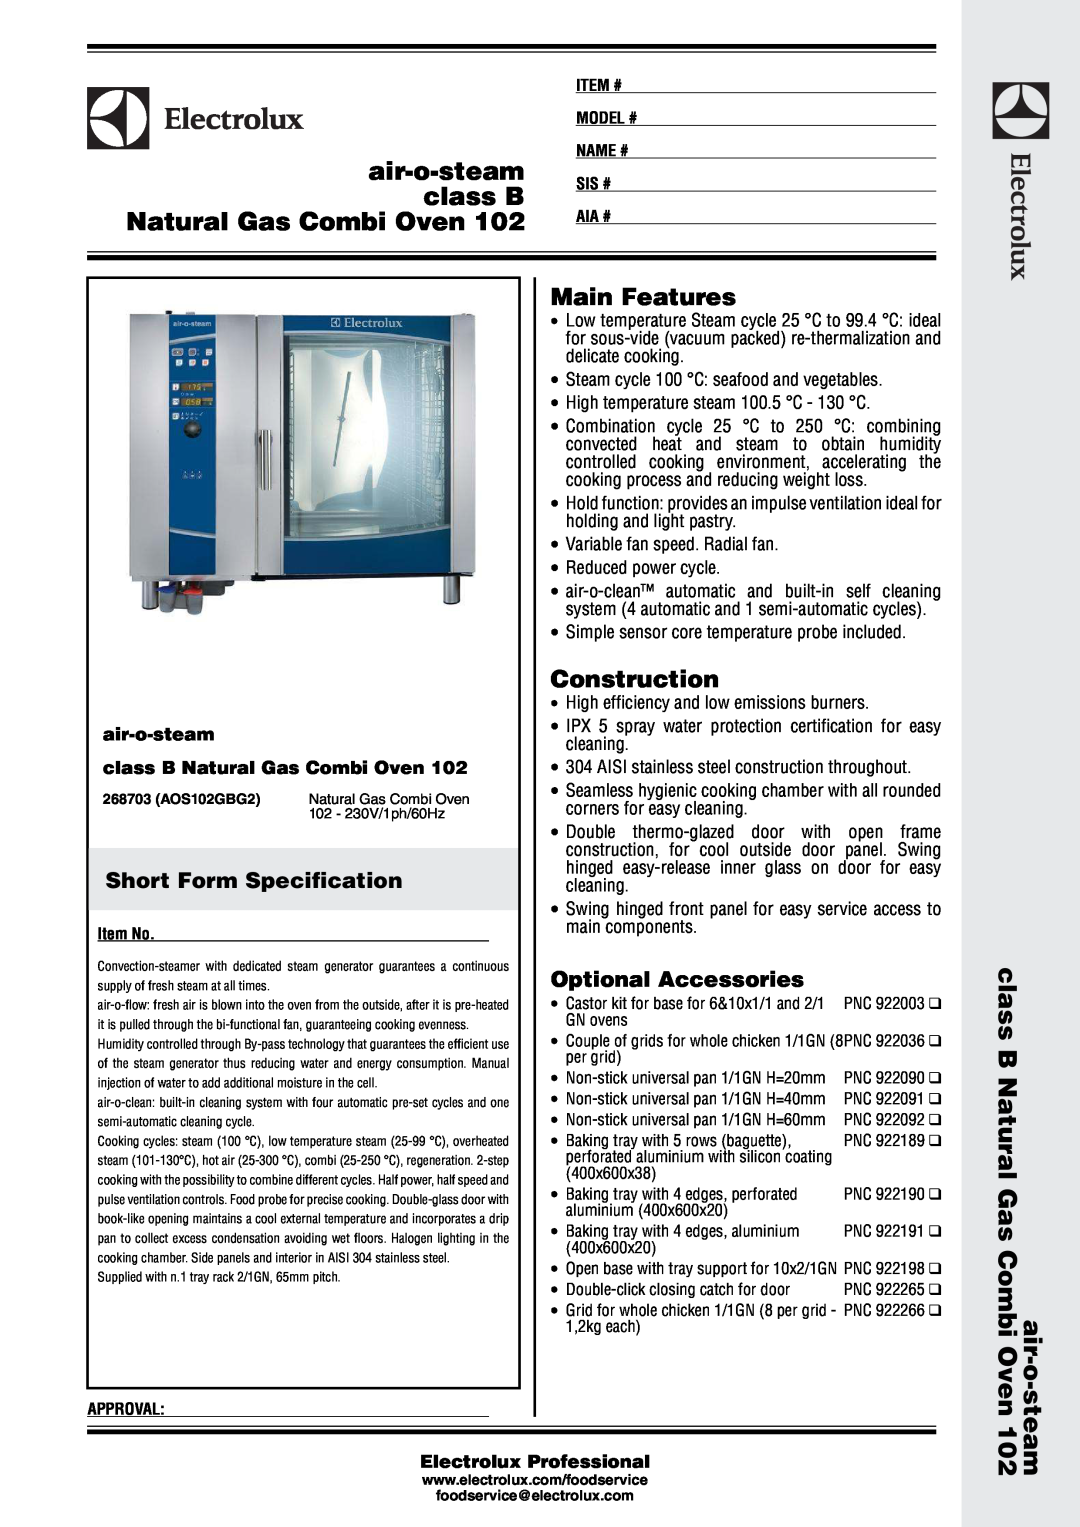 Electrolux 268703 manual air-o-steam class B Natural Gas Combi Oven, Short Form Specification, Main Features 